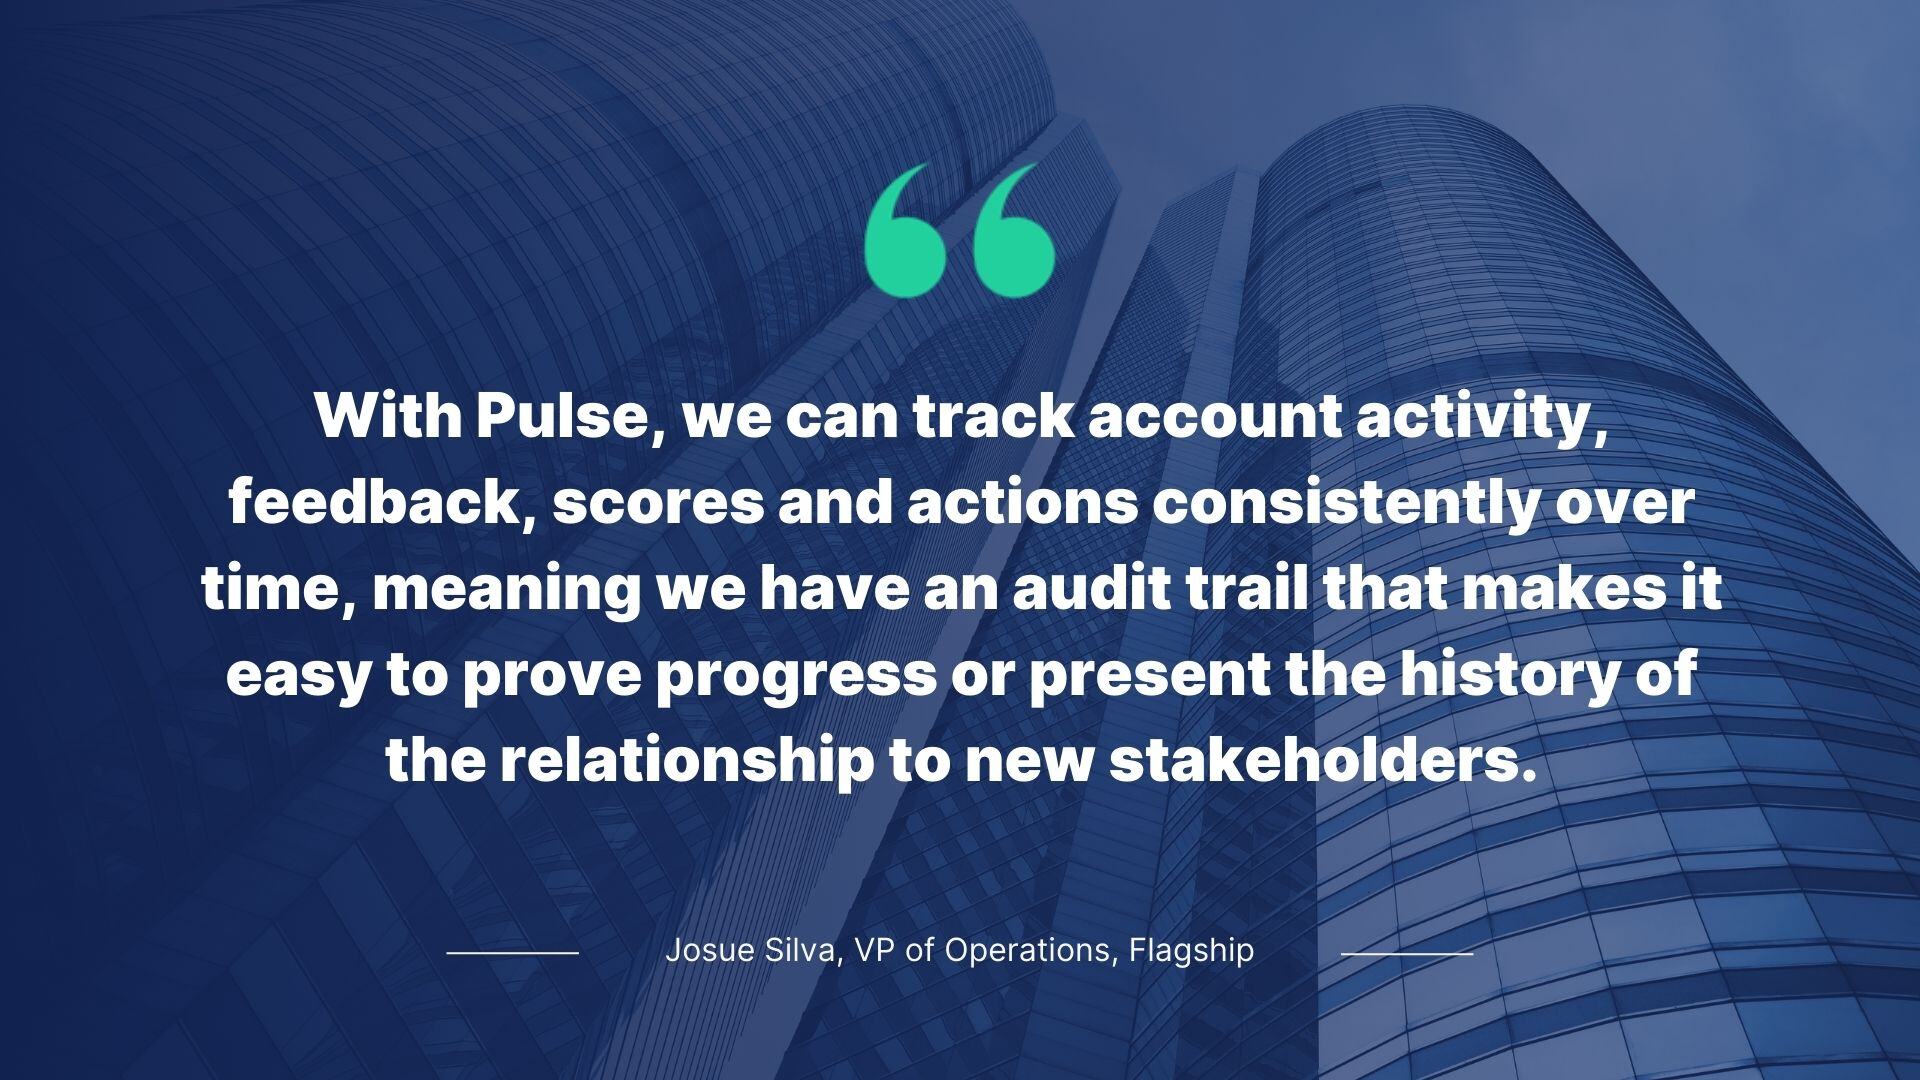 Quote from Josue Silva, VP of Operations, Flagship: With Pulse, we can track accounts activity, feedback, scores and actions consistently over time, meaning we have an audit trail that makes it wasy to prove progress or present the history of the relationship to new stakeholders.